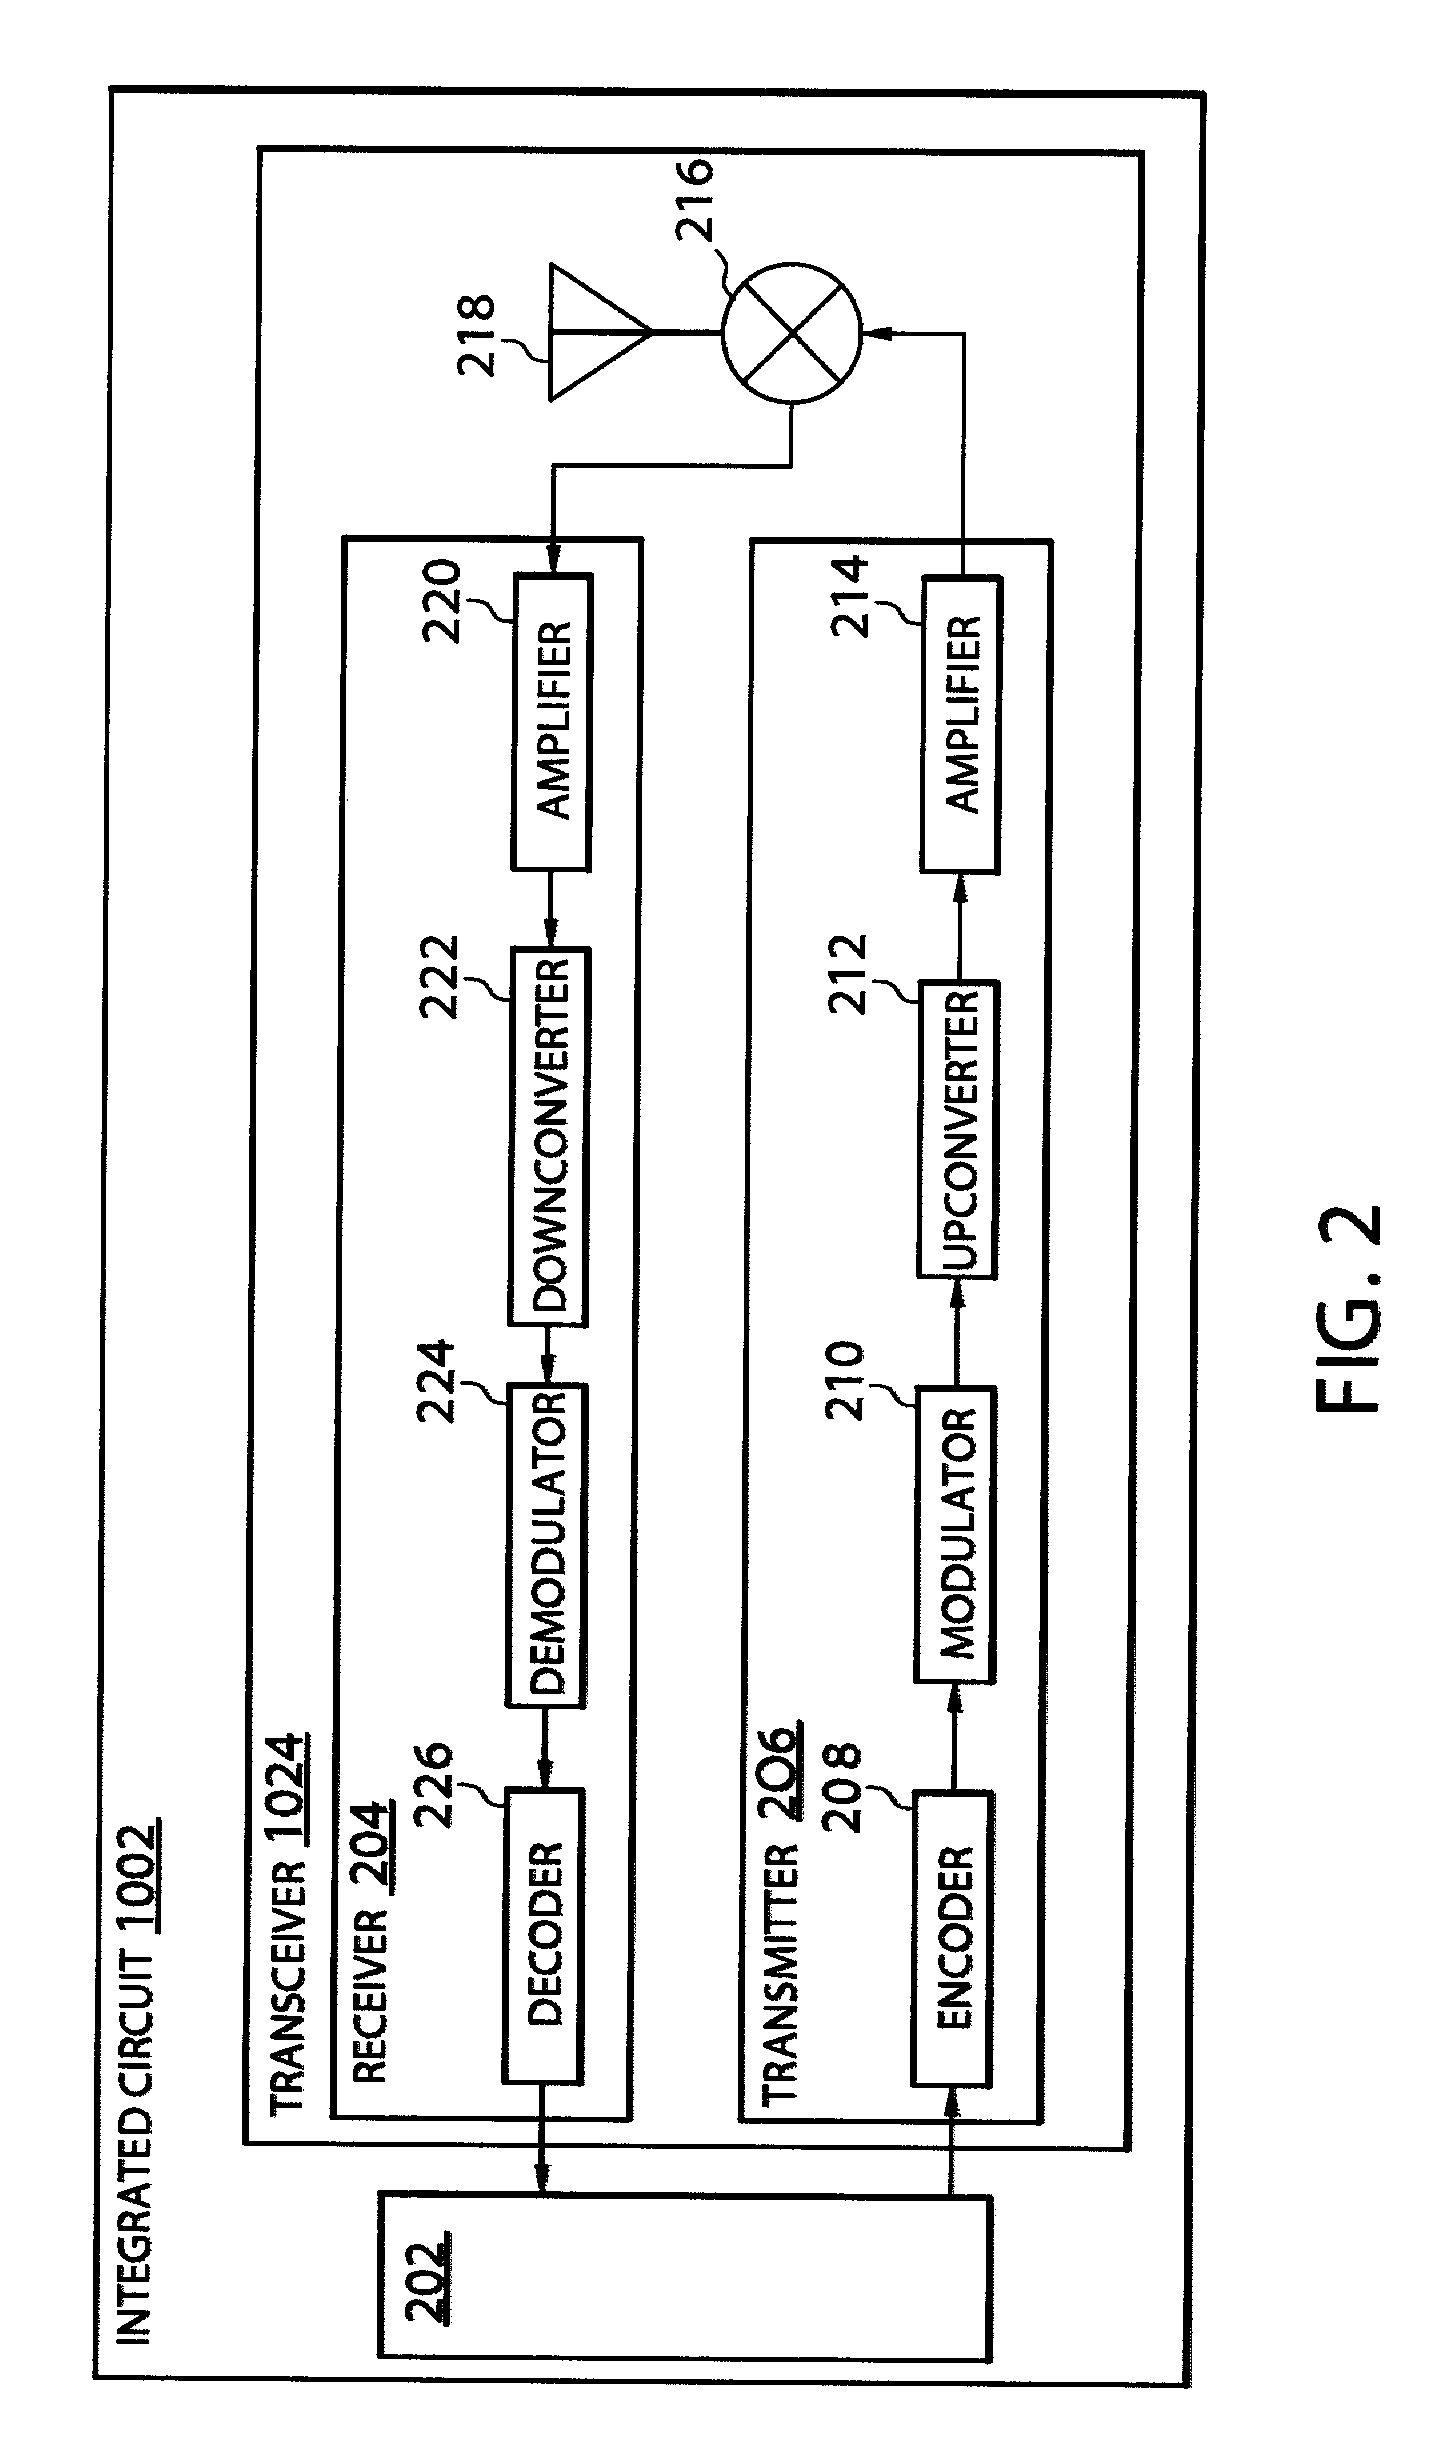 Systems and methods for multi-element antenna arrays with aperture control shutters